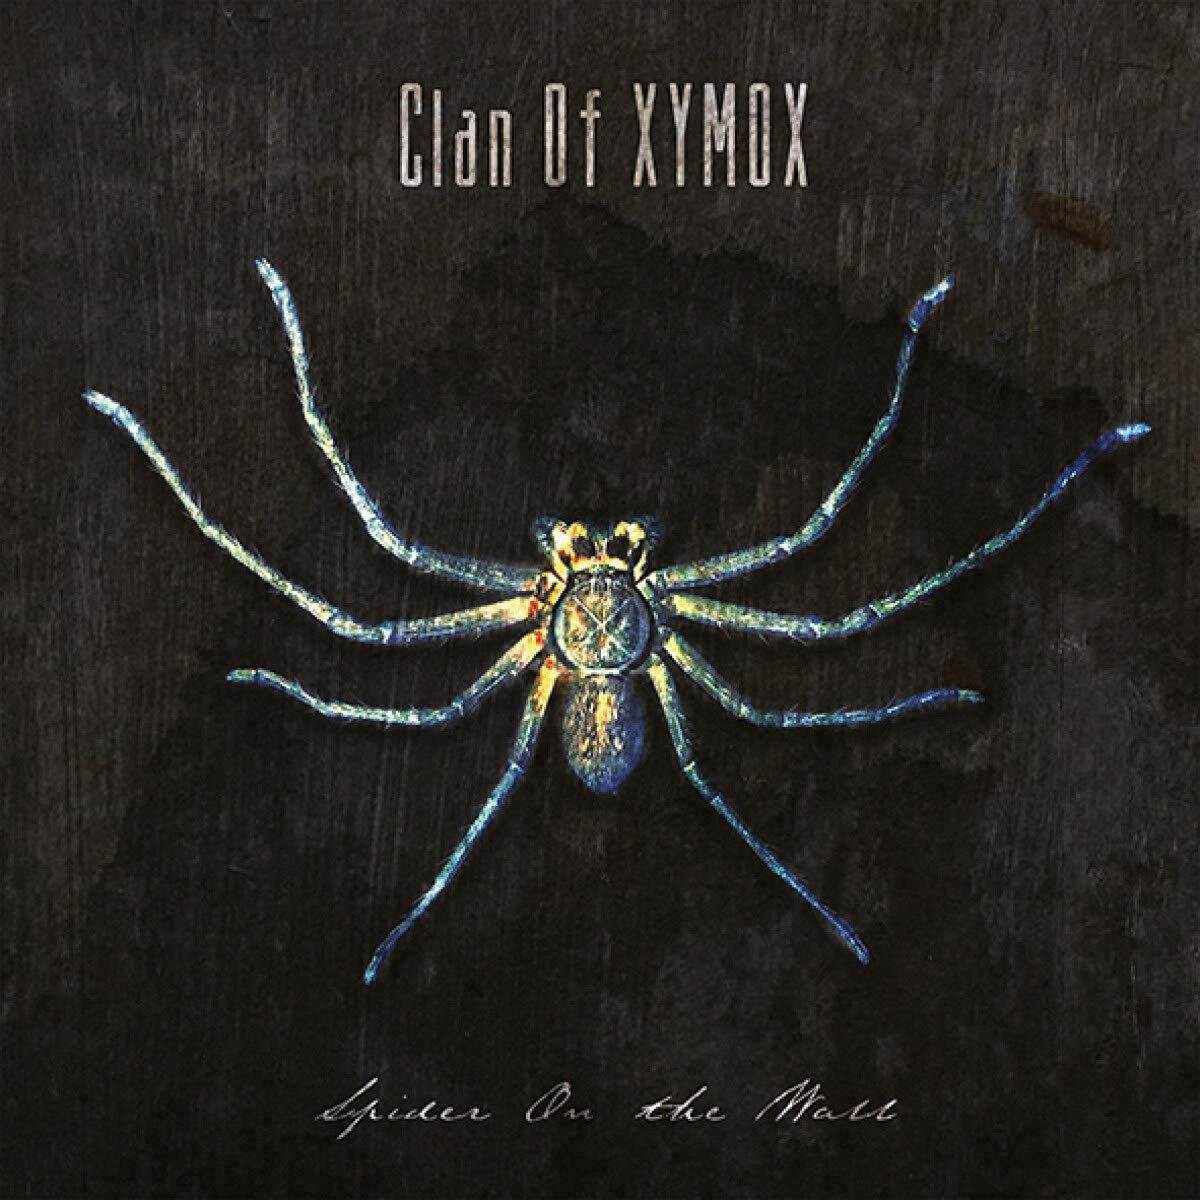 CD Shop - CLAN OF XYMOX SPIDER ON THE WALL